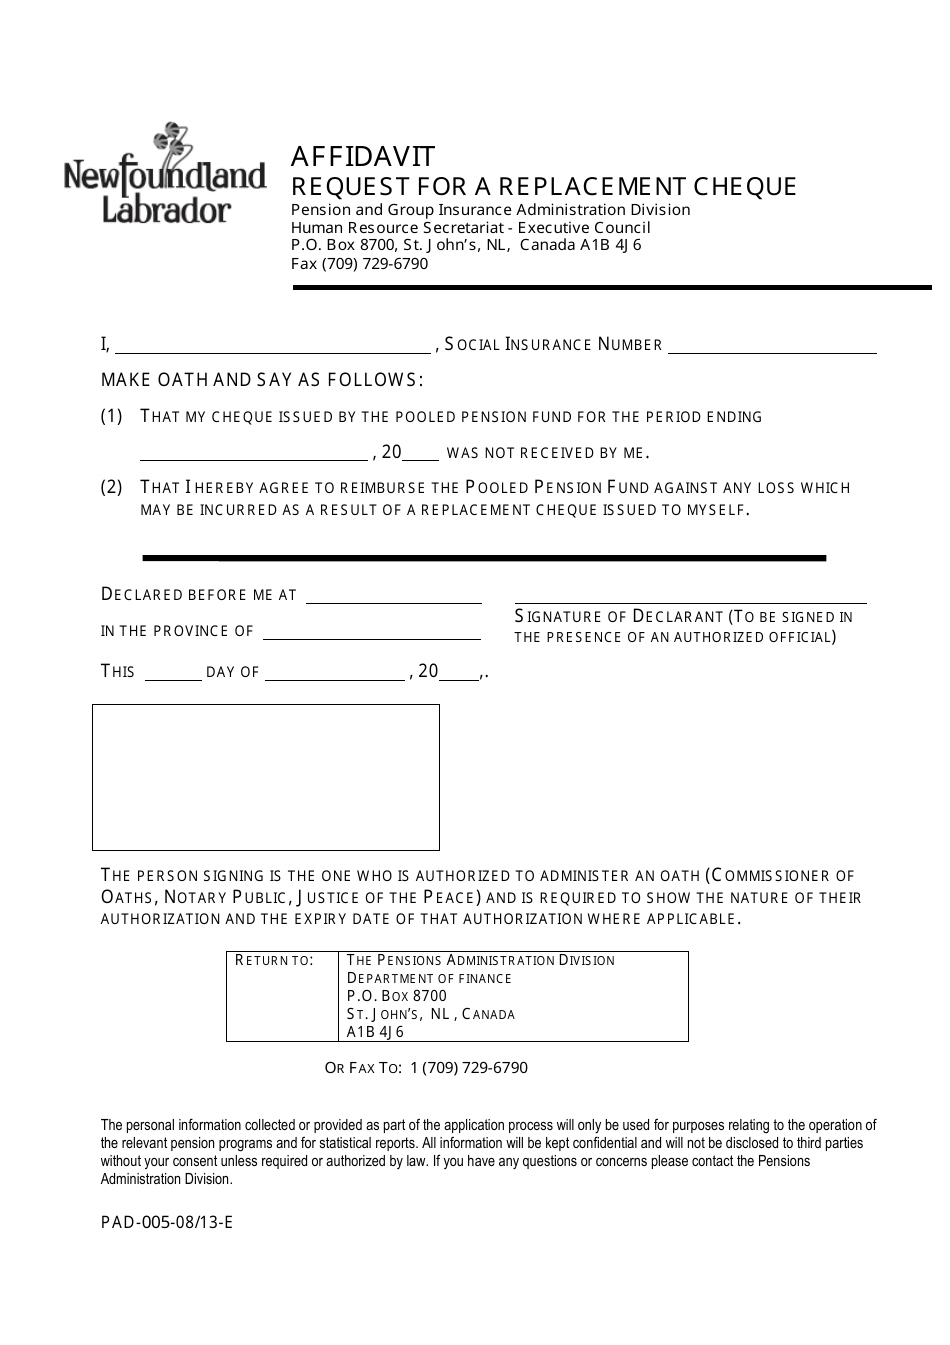 Form PAD-005 Affidavit - Request for a Replacement Cheque - Newfoundland and Labrador, Canada, Page 1